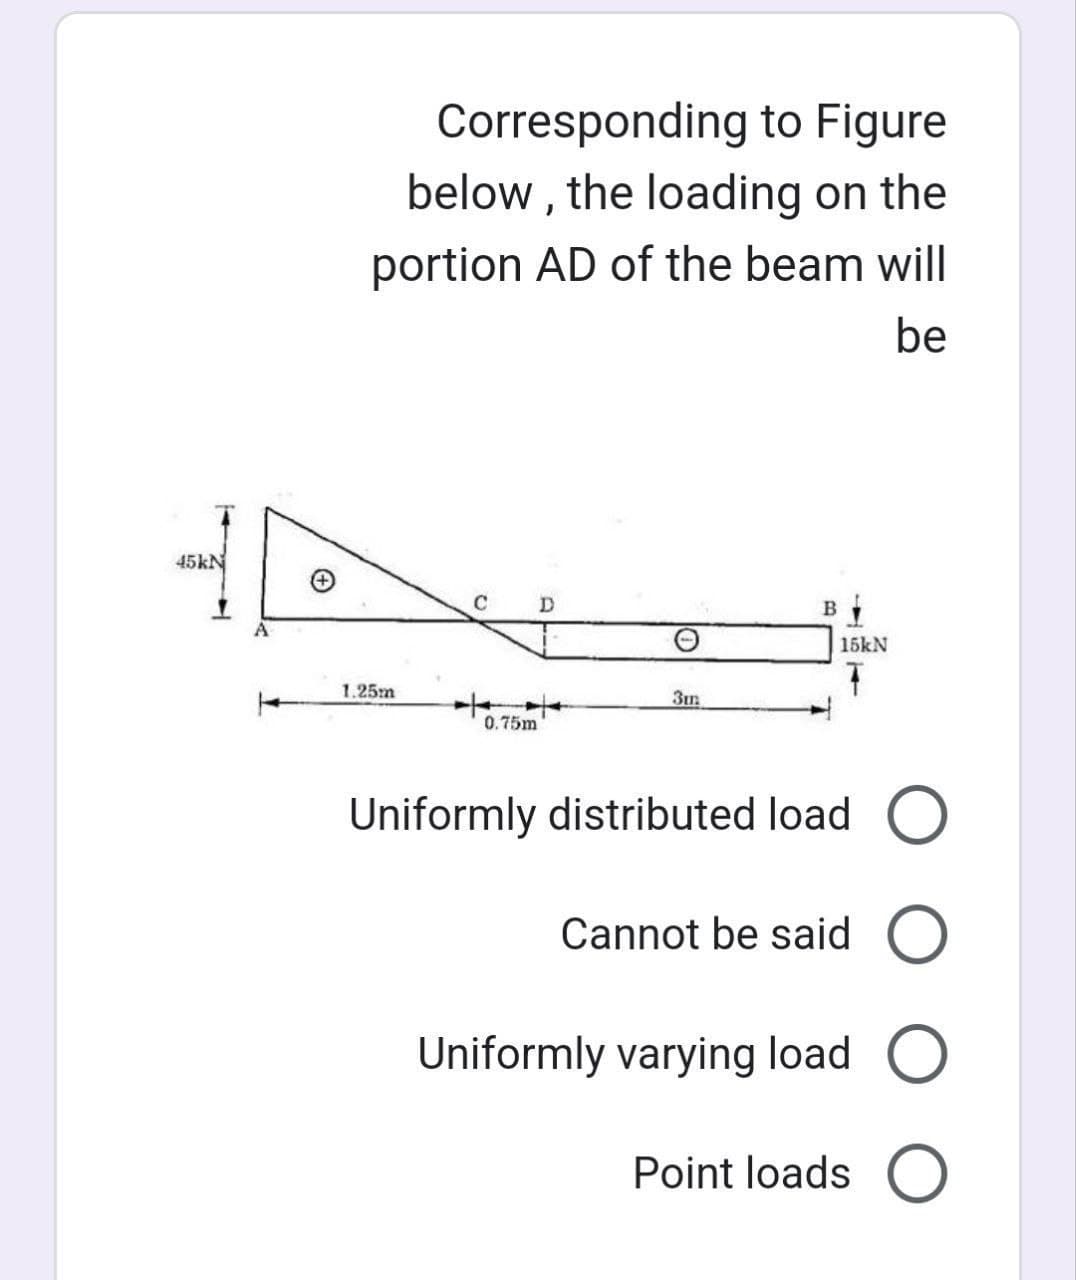 45kN
Corresponding to Figure
below, the loading on the
portion AD of the beam will
be
C
1.25m
3m
0.75m
B
15kN
Uniformly distributed load ◎
Cannot be said ○
Uniformly varying load ◎
Point loads O